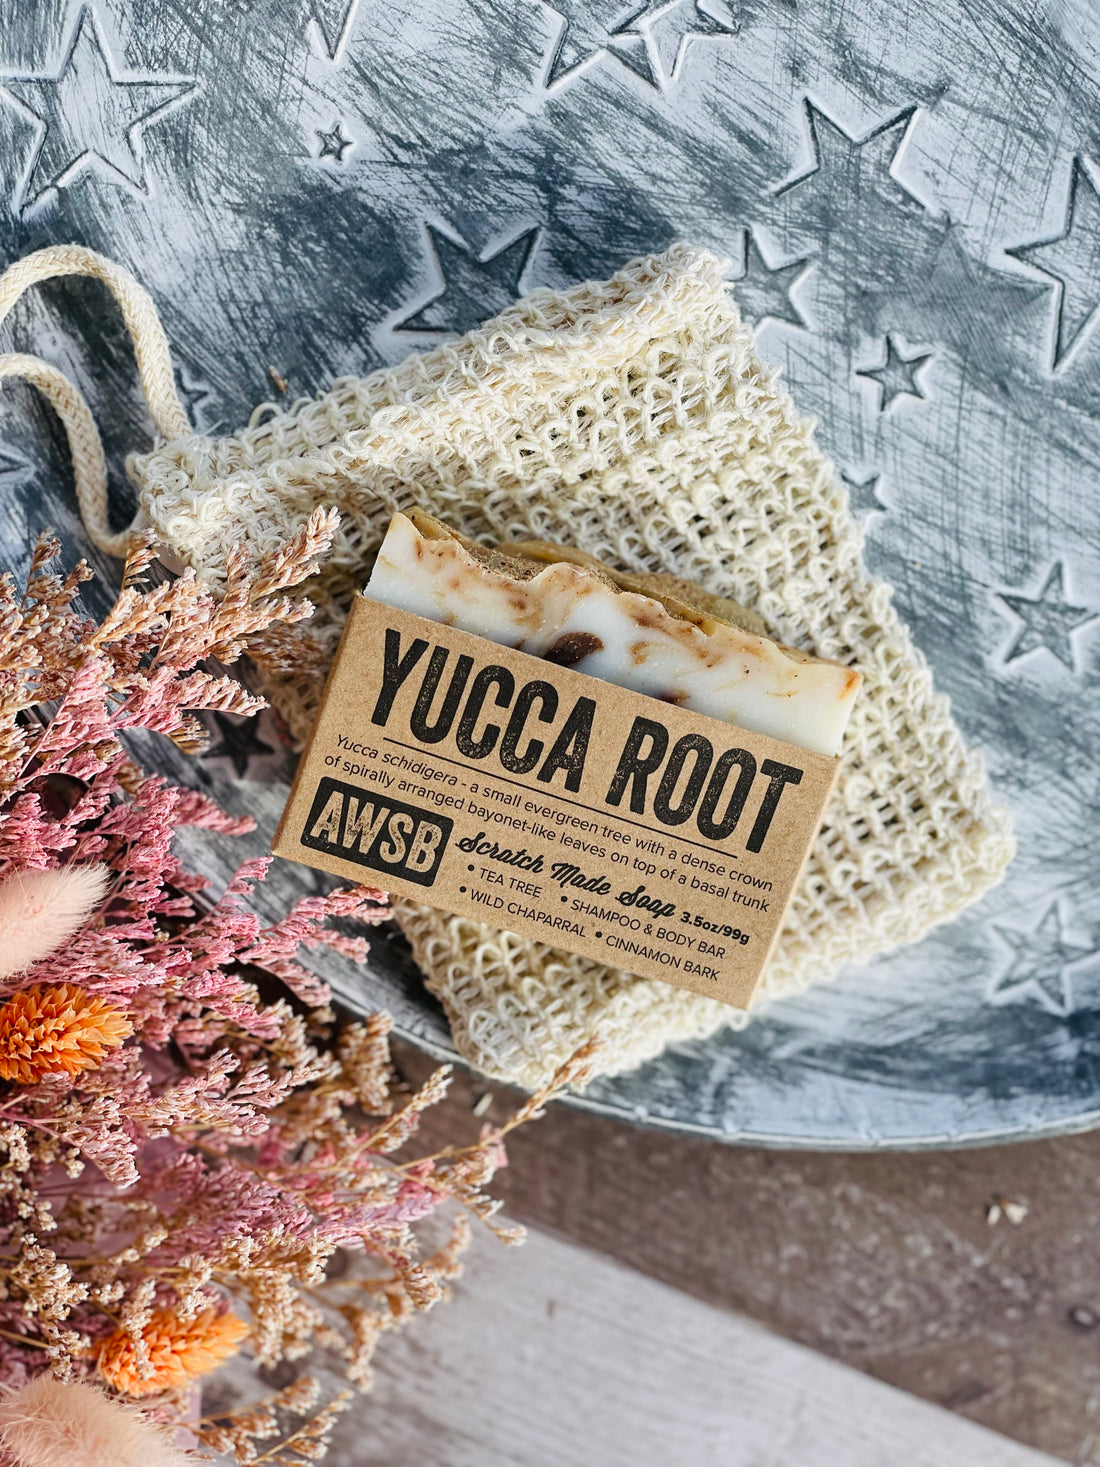 Yucca Root Soap